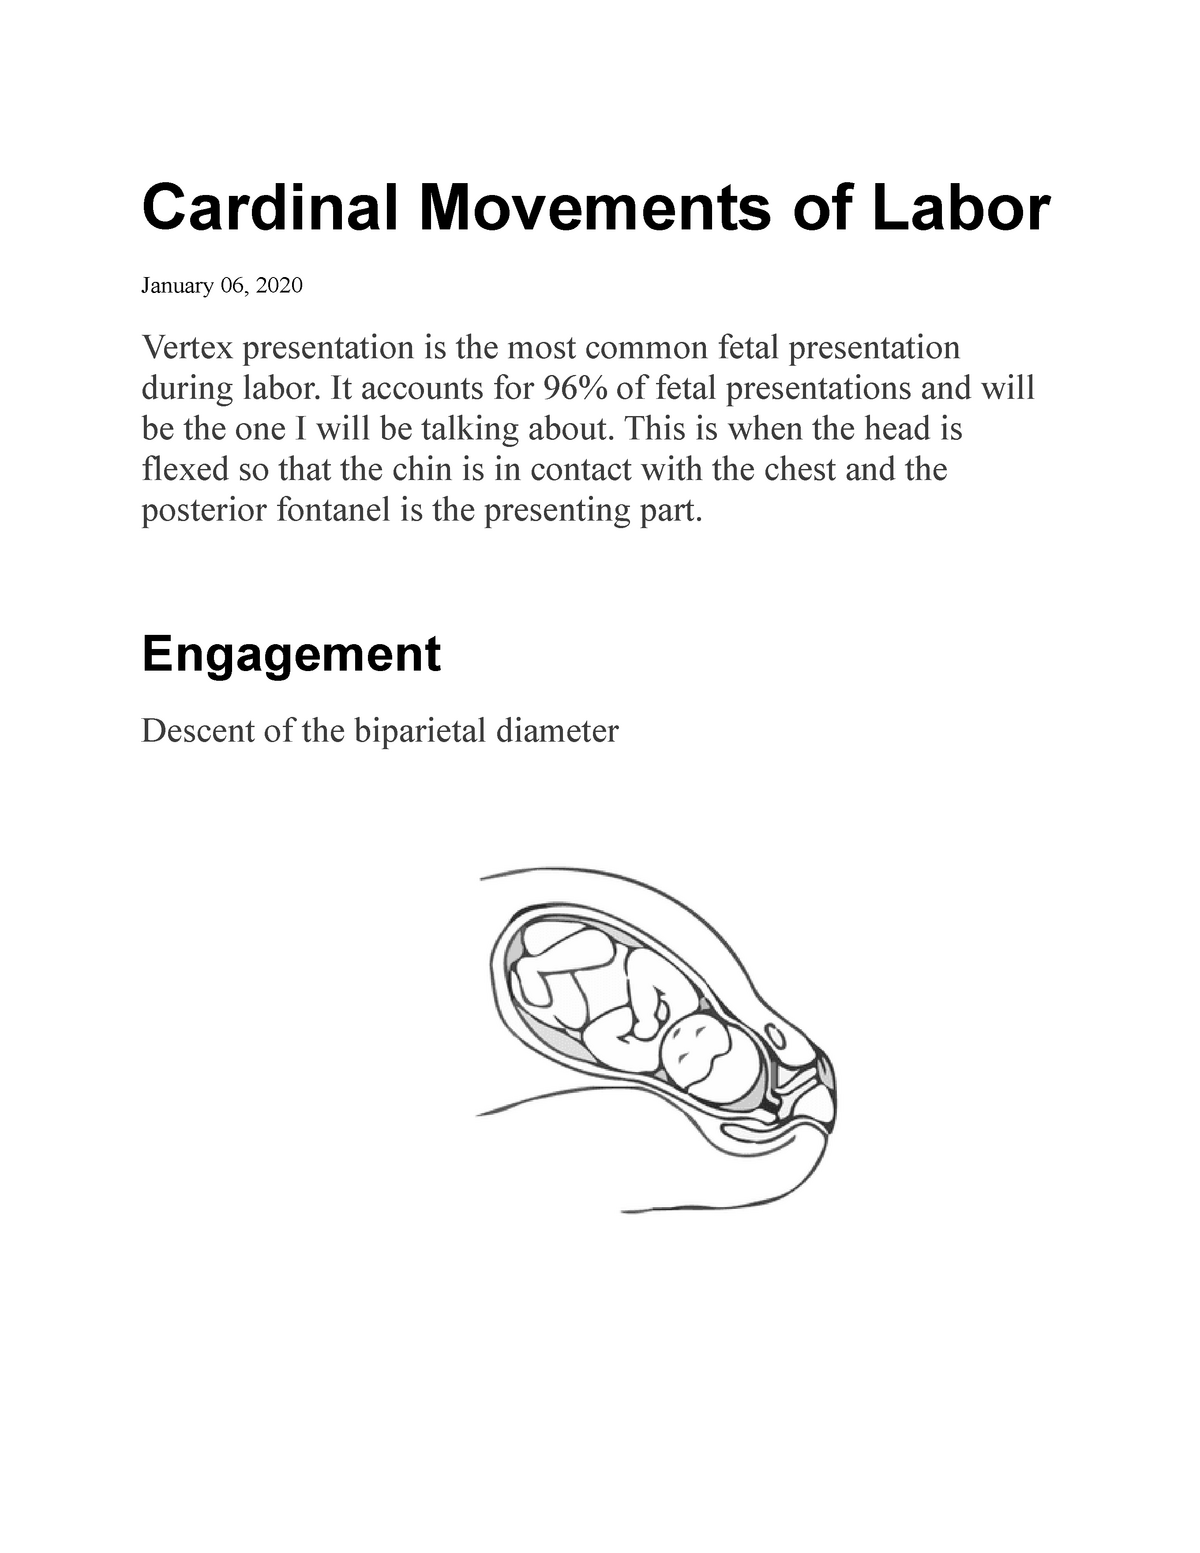 define the cardinal movements of labor